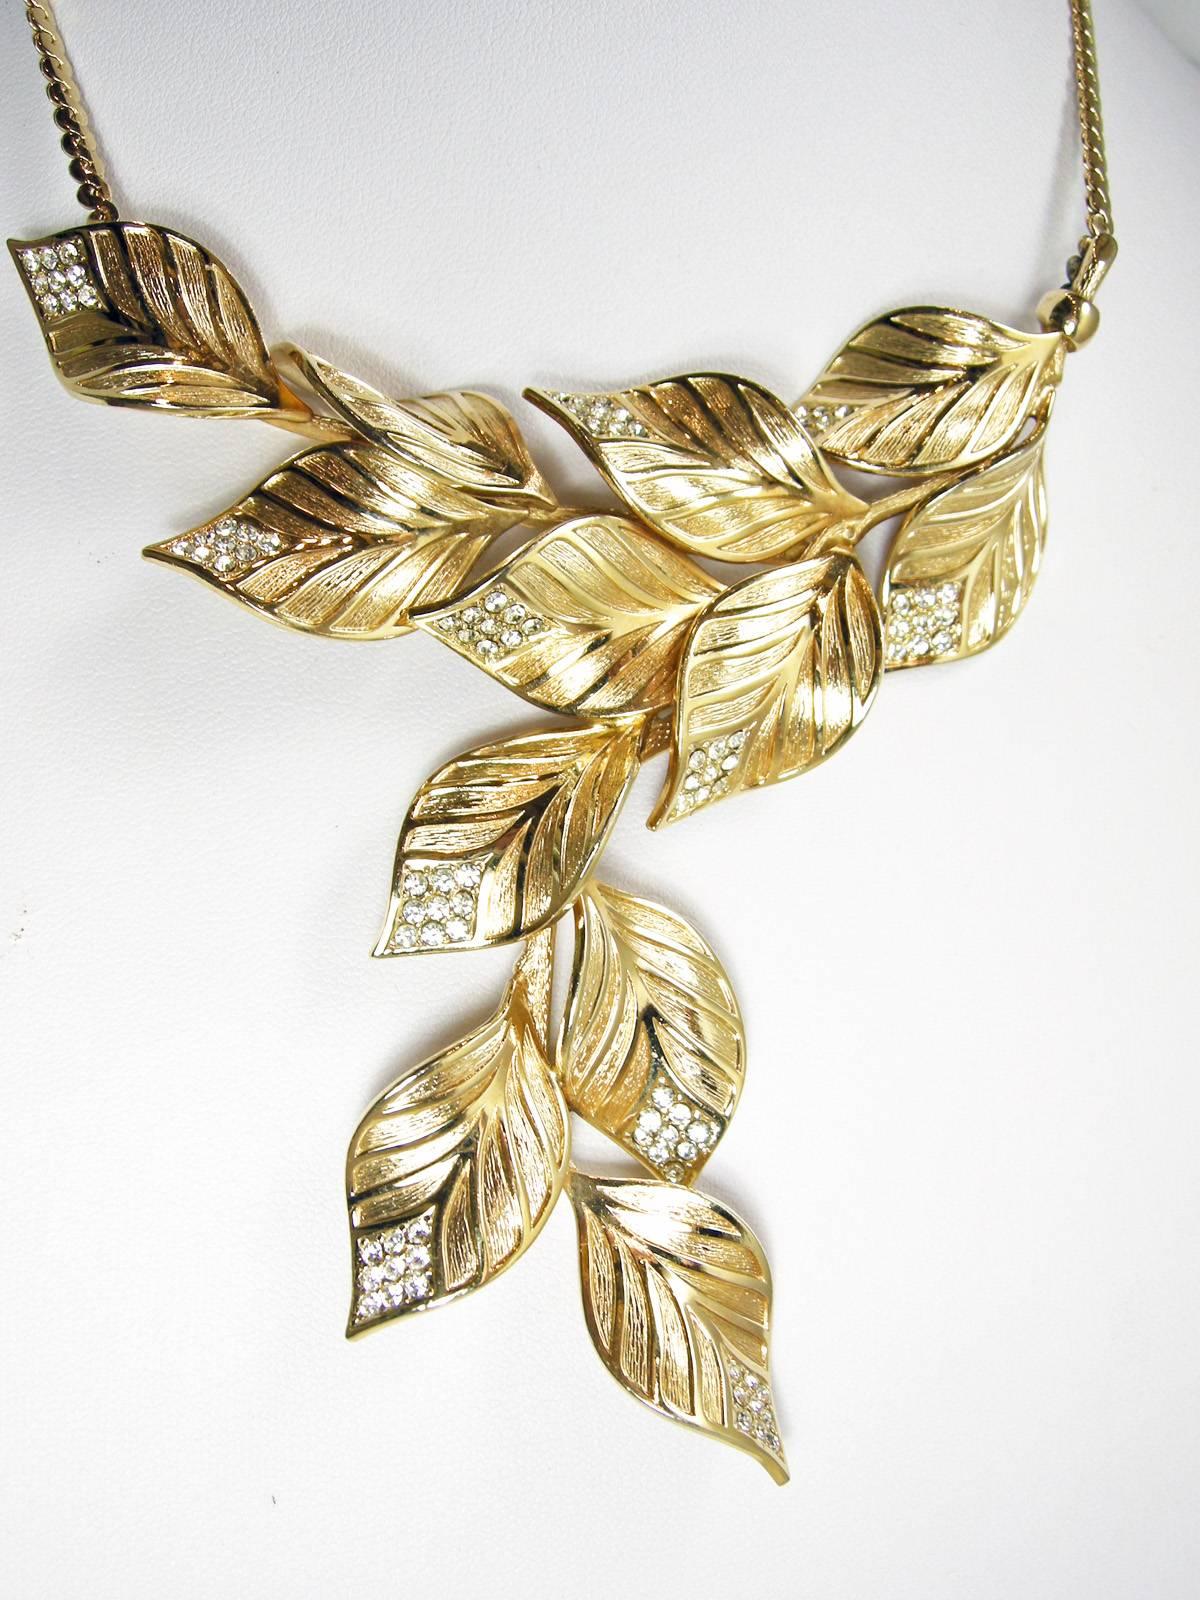 This Dior necklace has a sophisticated design with gold tone detailed leaves flowing downward.  At the end of each leaf are beautiful clear crystals.  It has a snake chain with a fold over clasp.  The necklace is 15” and the centerpiece is 4” wide